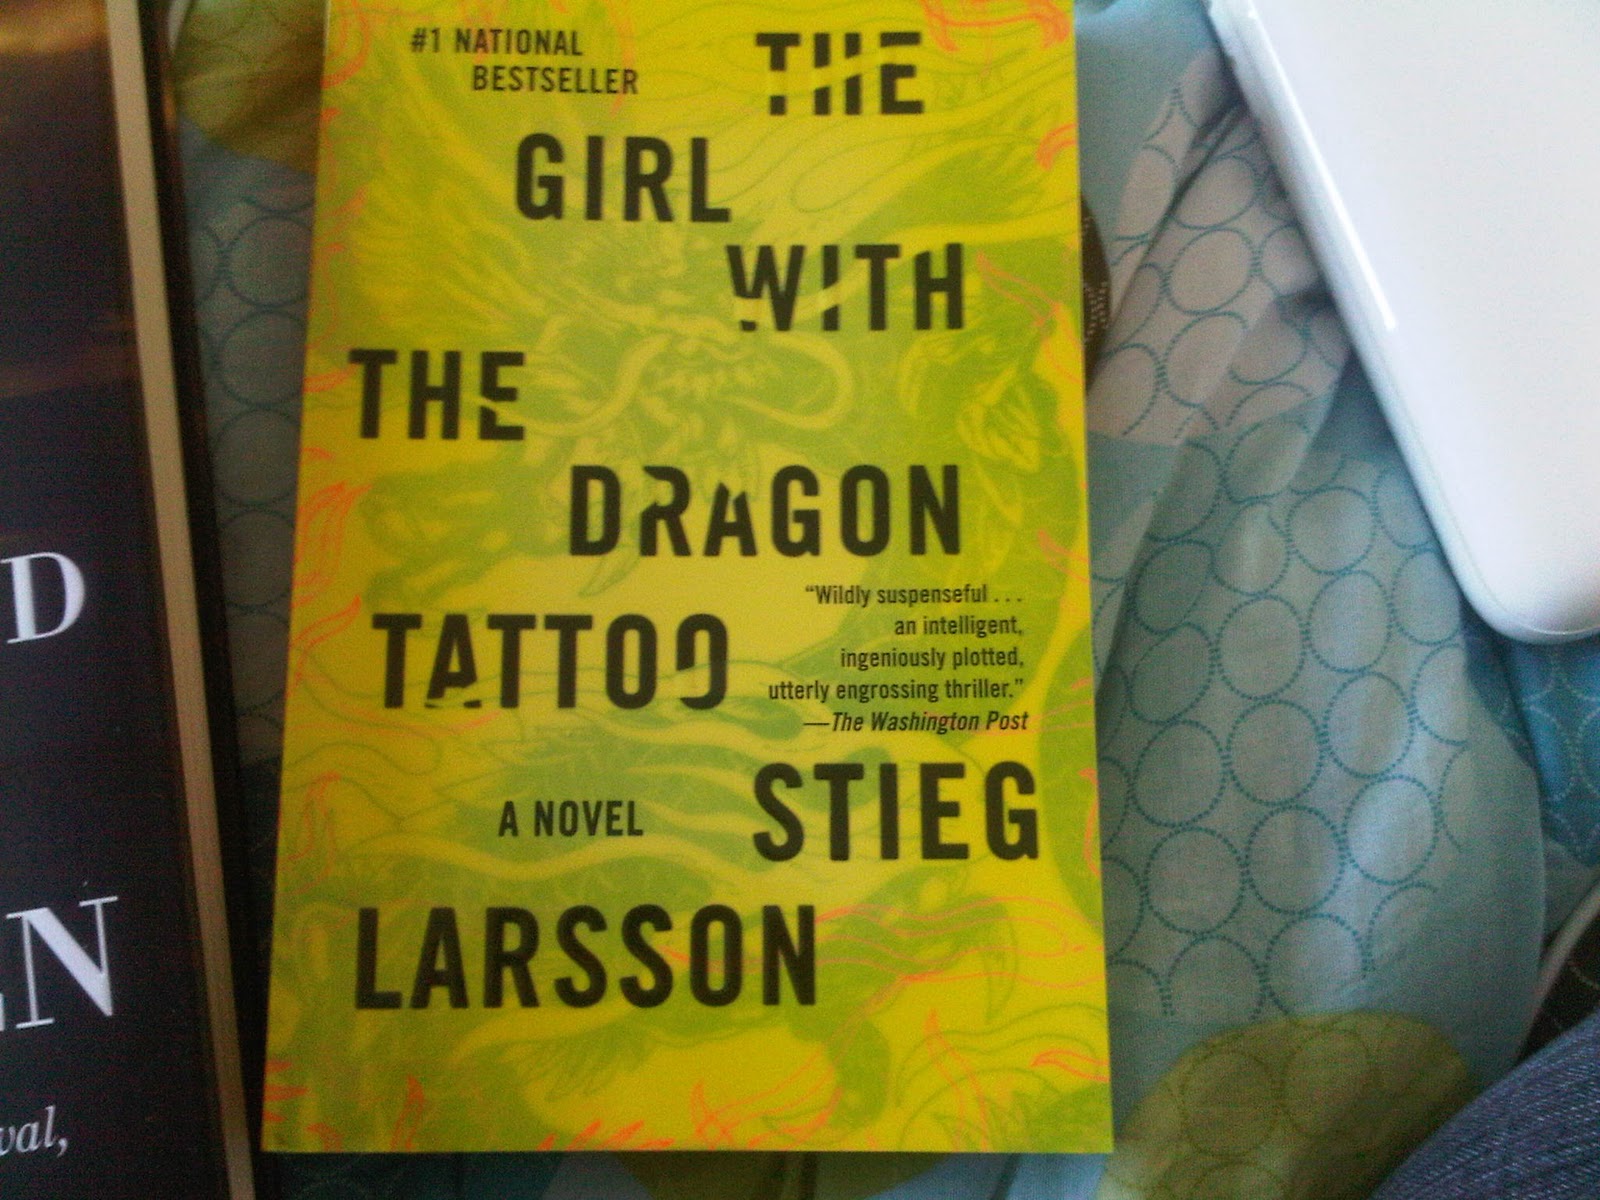 With The Dragon Tattoo